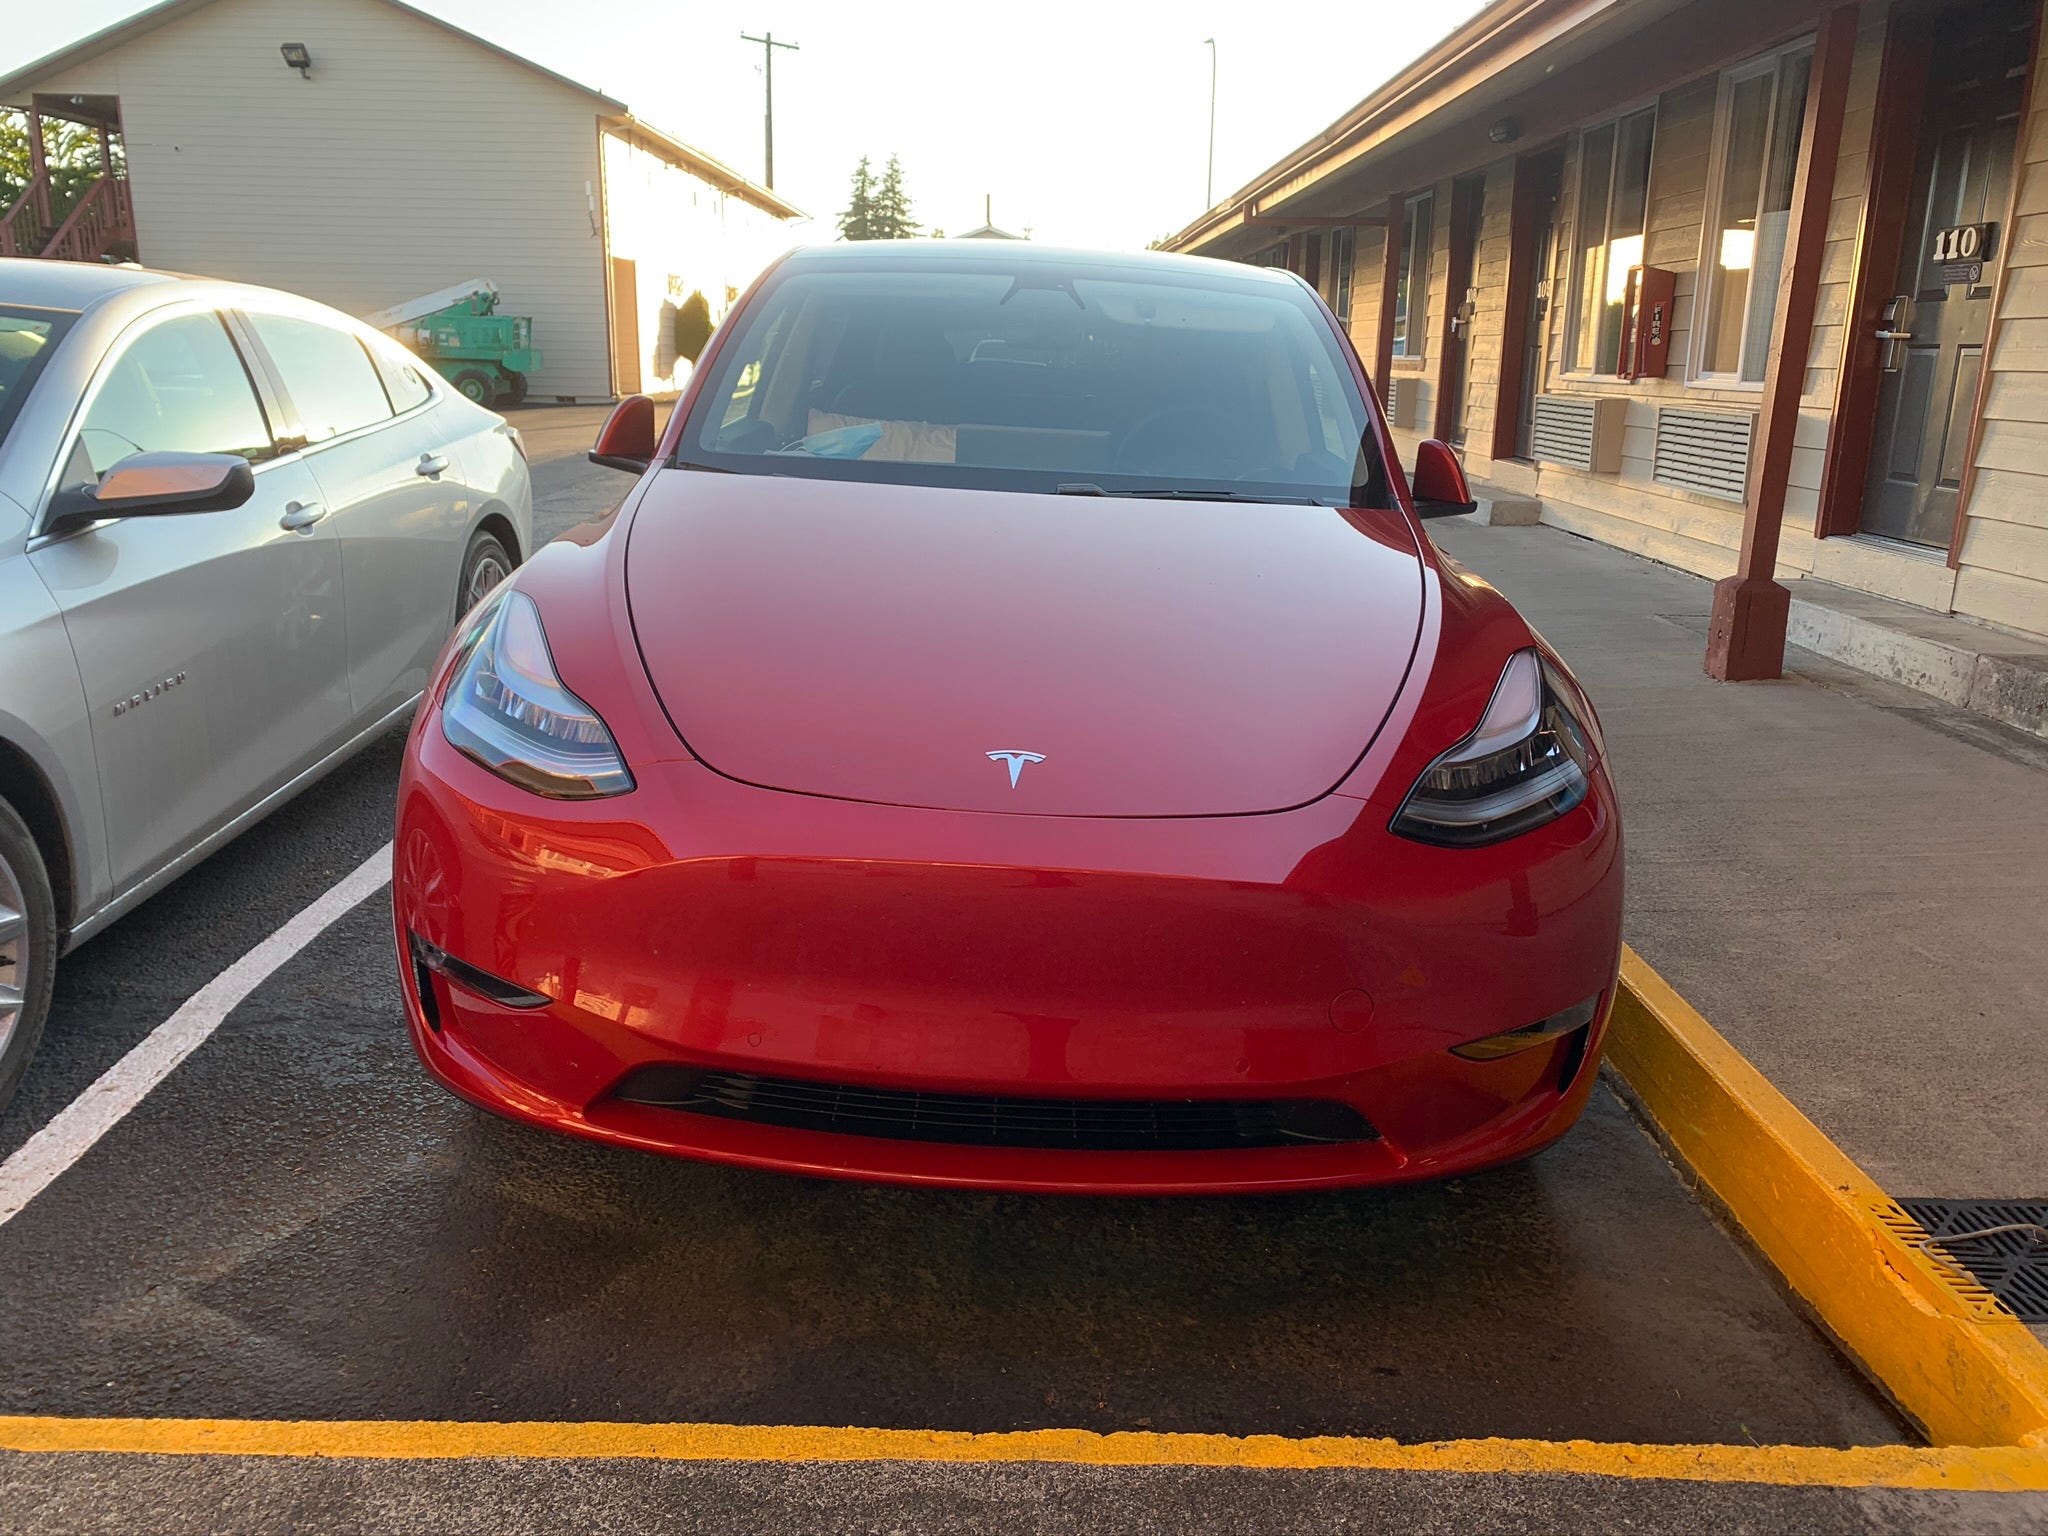 Benzinga Before The Bell: Tesla's China Sales Plunge, Snap Rolls Out Parental Control Features, White House Unaware of Raid On Trump's Mar-a-Lago And Other Top Financial Stories Tuesday, August 9